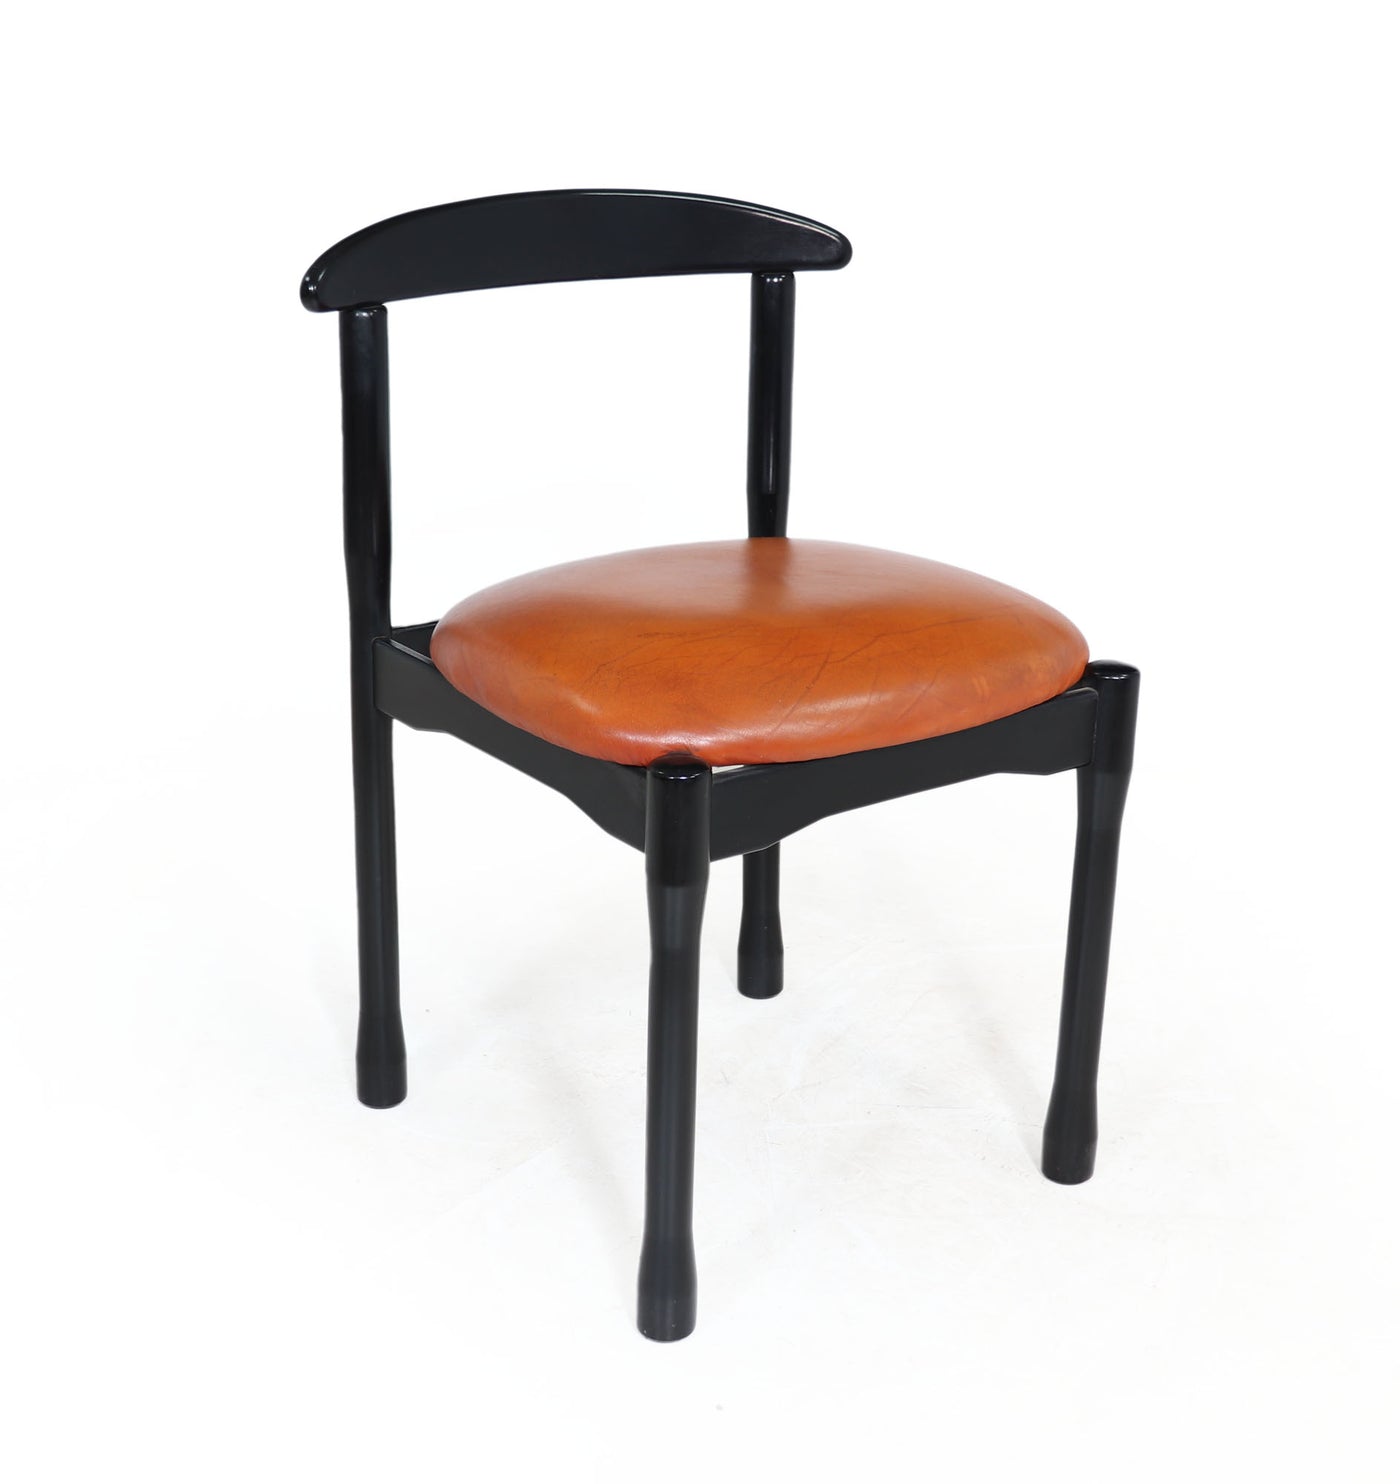 MId Century Italian Dining Chairs by Vico Magistretti video